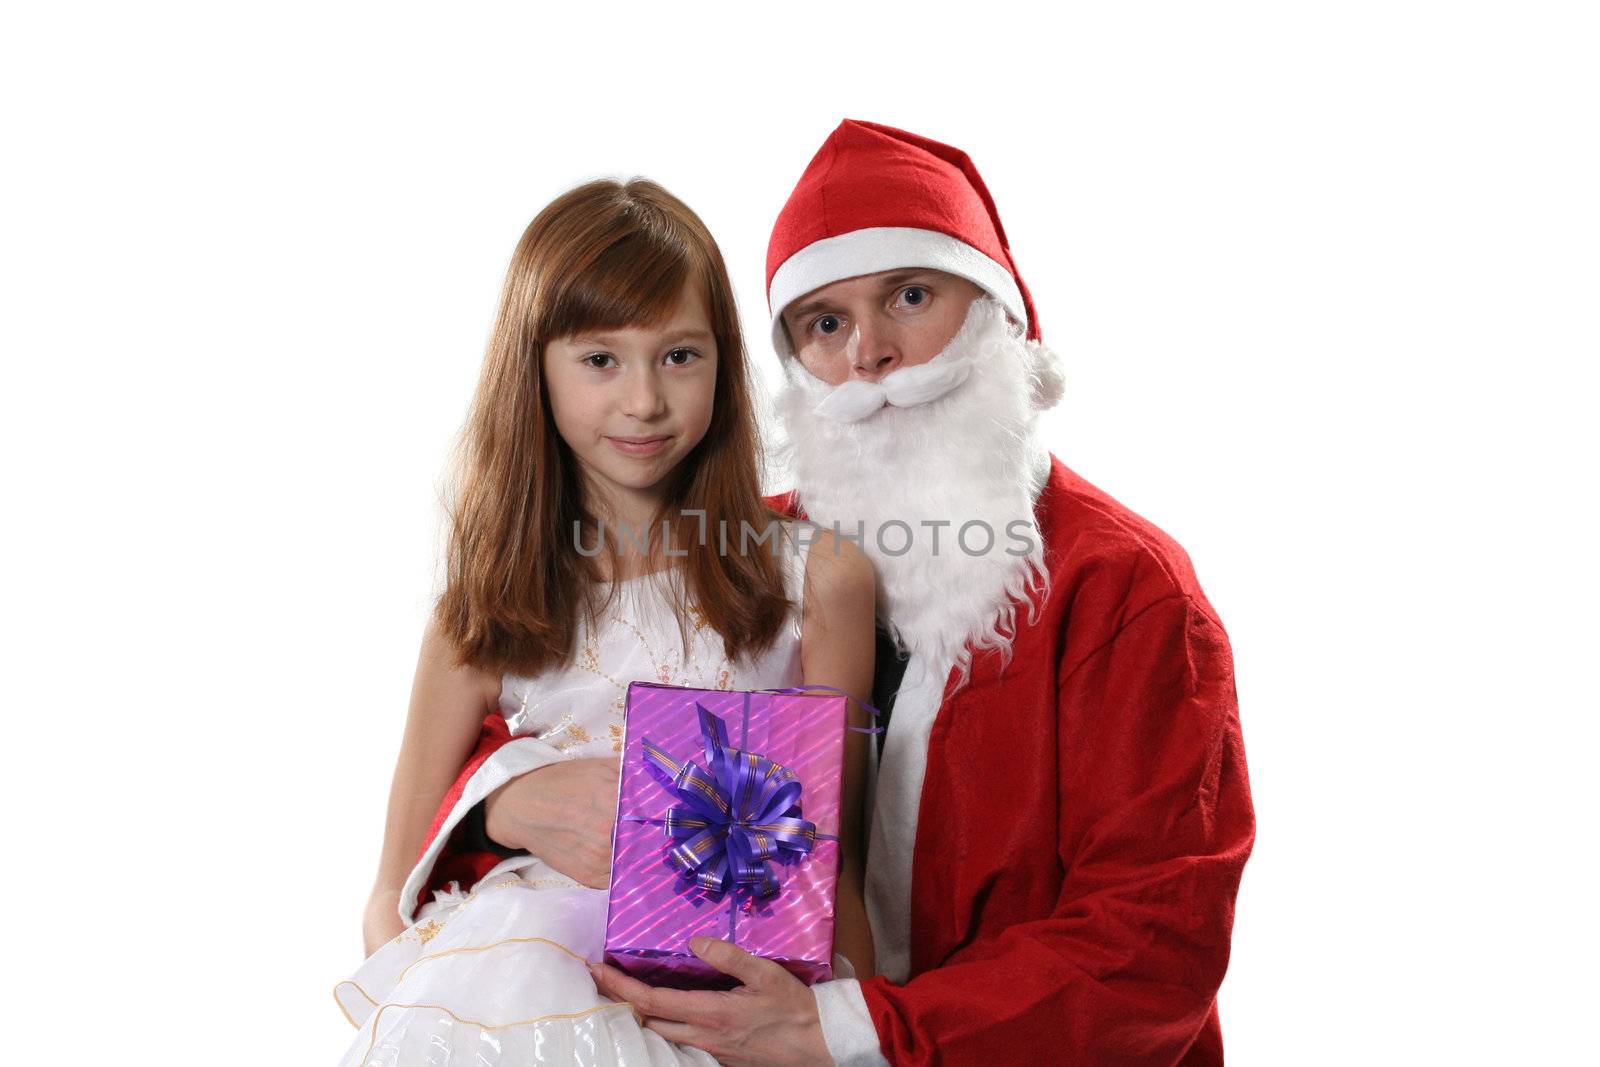 Santa poses with the girl and a gift on a white background